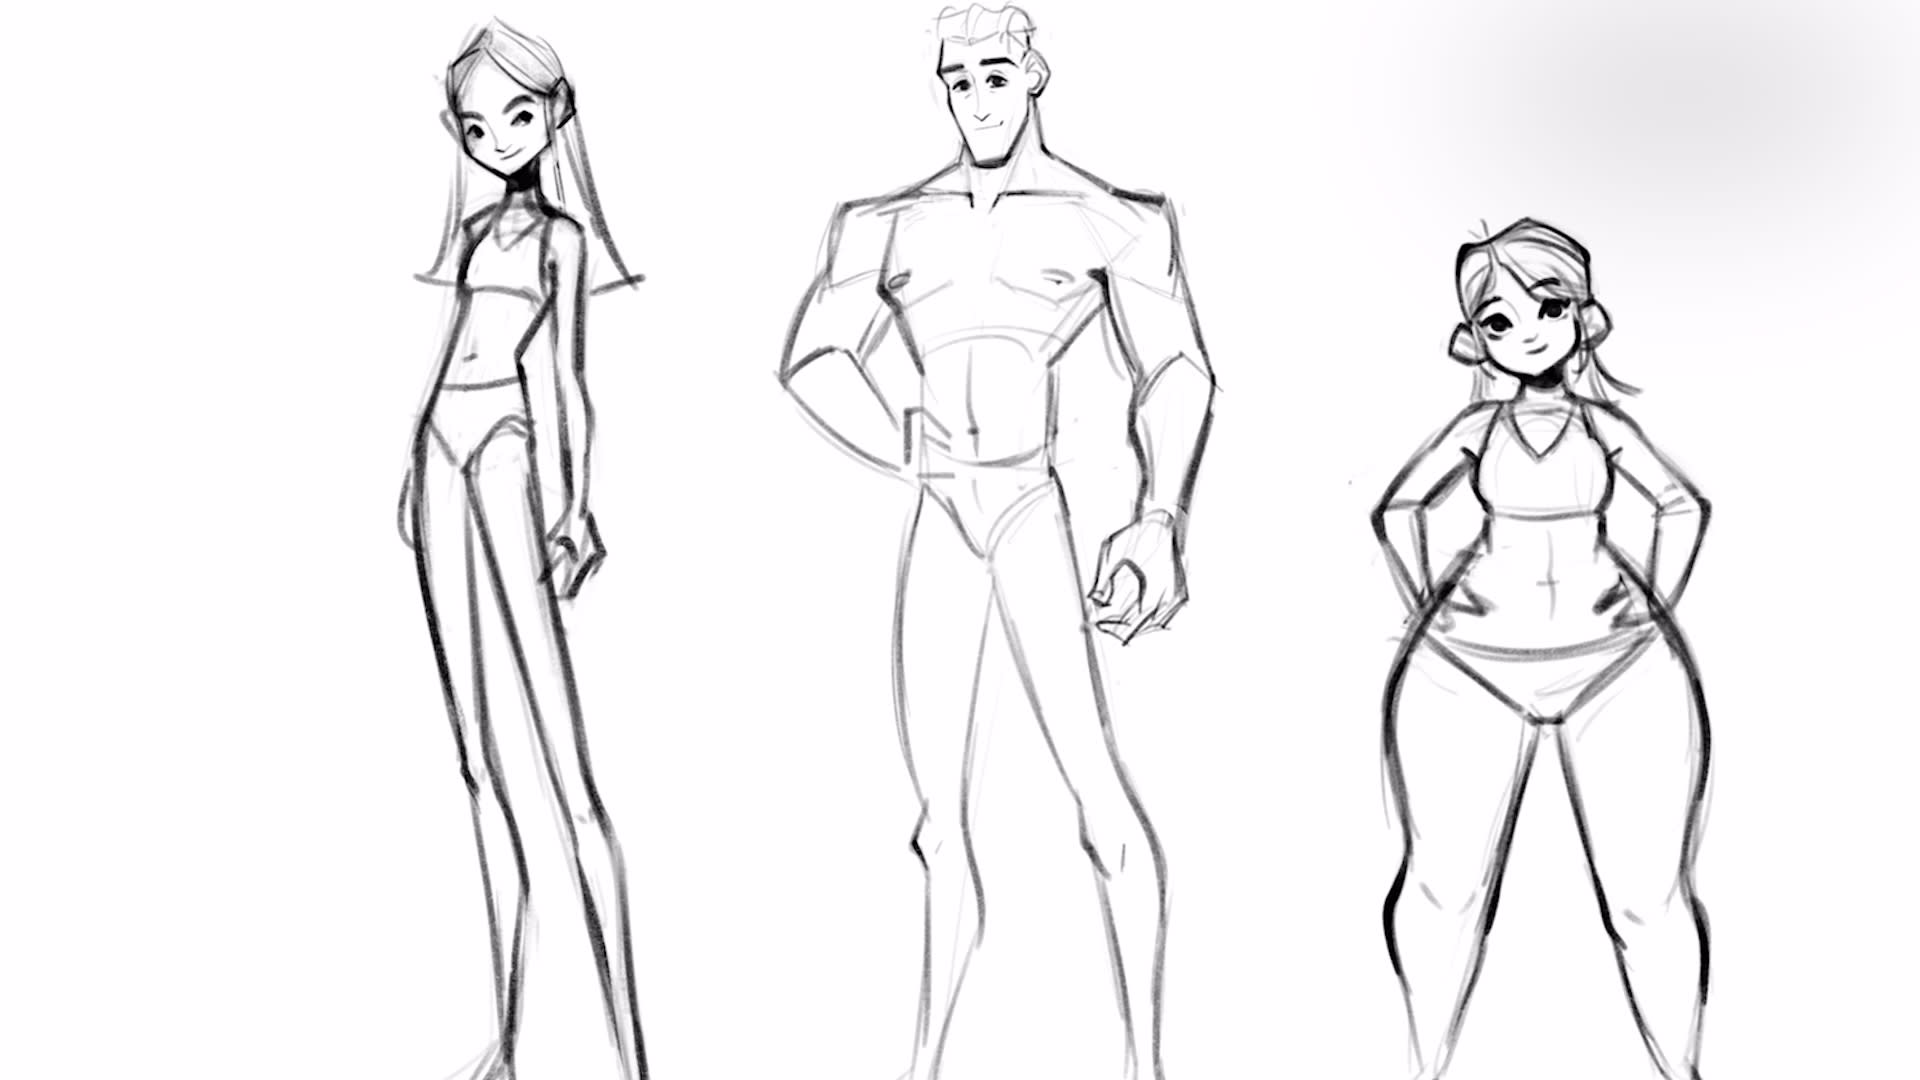 Illustration Tutorial: How to Draw Different Body Types